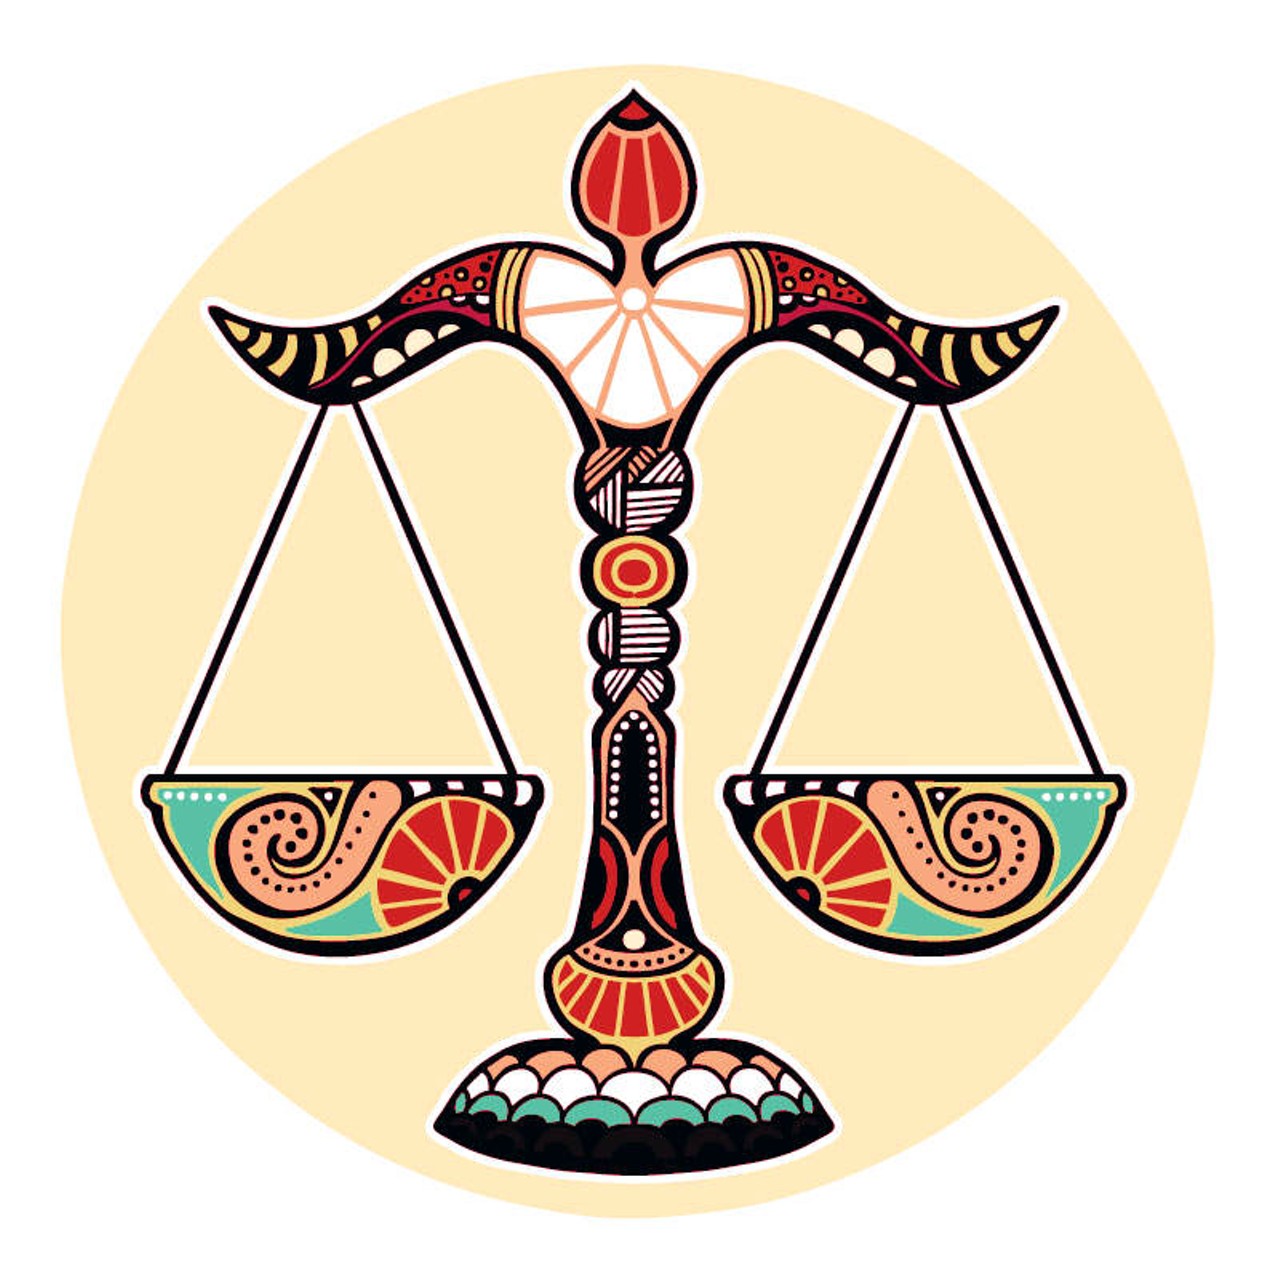 LIBRA (Sept. 21-Oct. 20): 
You&#146;ve got yourself covered in more ways than one. Having seen your share of lies and bullshit, the bigger part of you knows that it pays to be more aware of other people&#146;s issues than they are. With too many unconscious egomaniacs playing in the sandbox, you see the extent to which your life could get hog-tied to their misbegotten aims. As the part of you that is a champ at putting on a happy face and dealing with it plays side by side with what&#146;s really going on, your ability to maintain pretenses will serve to remind you that more often than not, the end justifies the means.